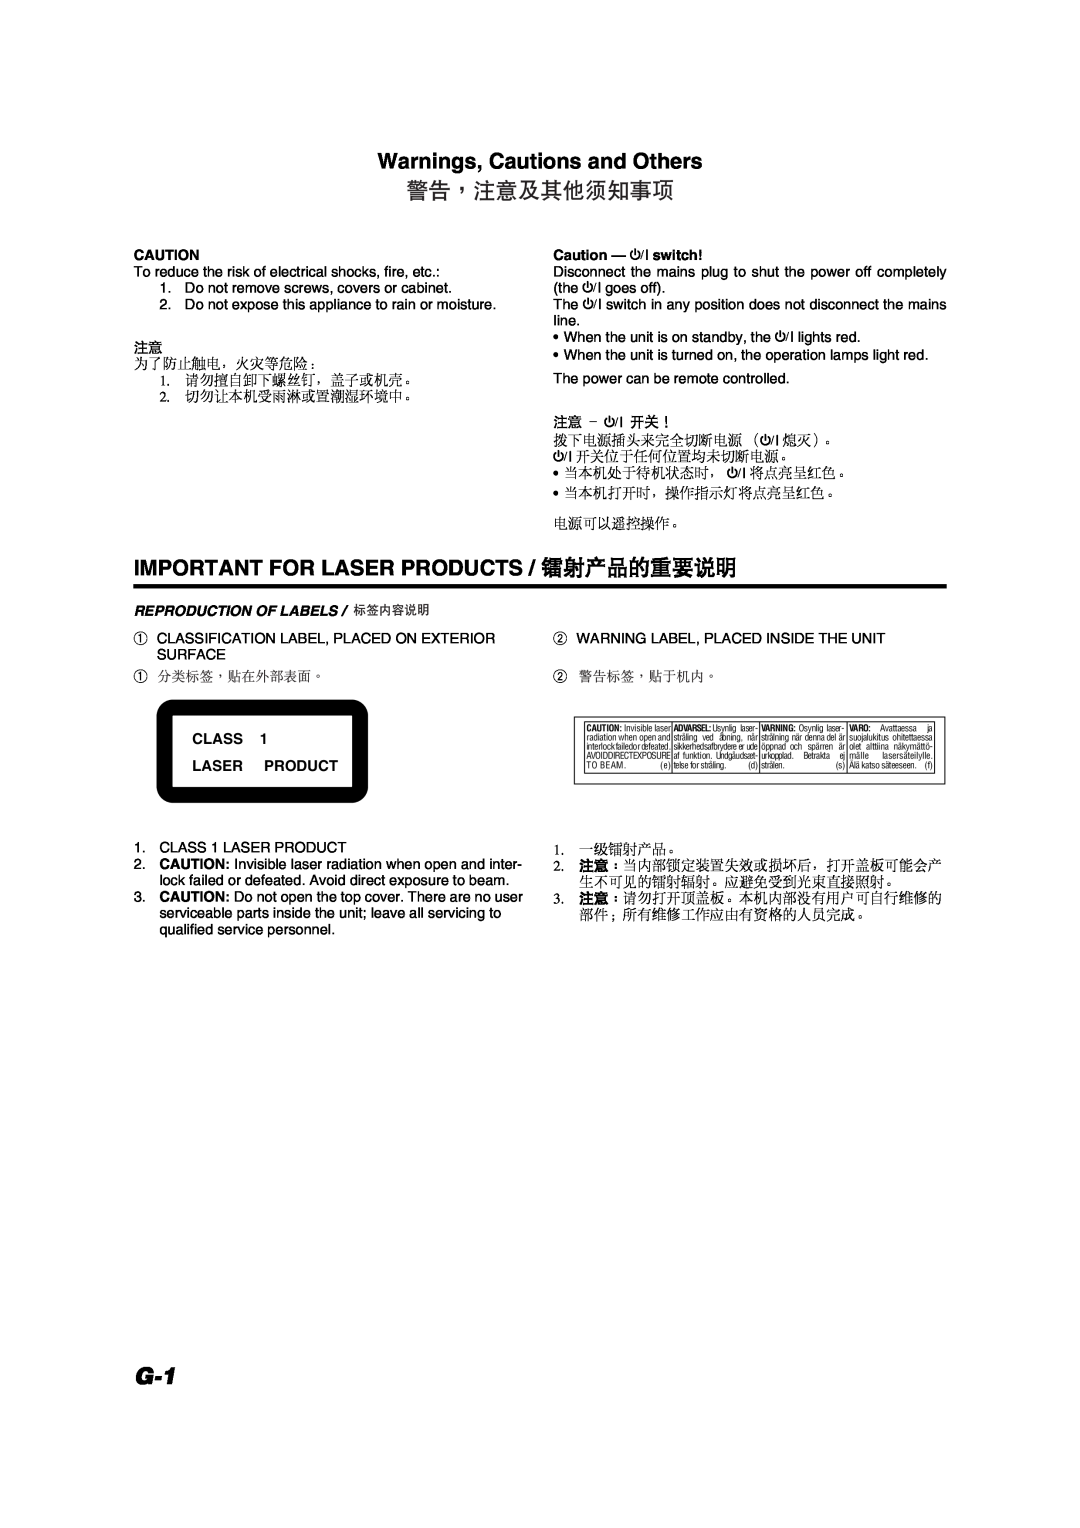 JVC VS-DT68V, VS-DT88V manual Warnings, Cautions and Others, Important For Laser Products / 镭射产品的重要说明, Caution - % switch 